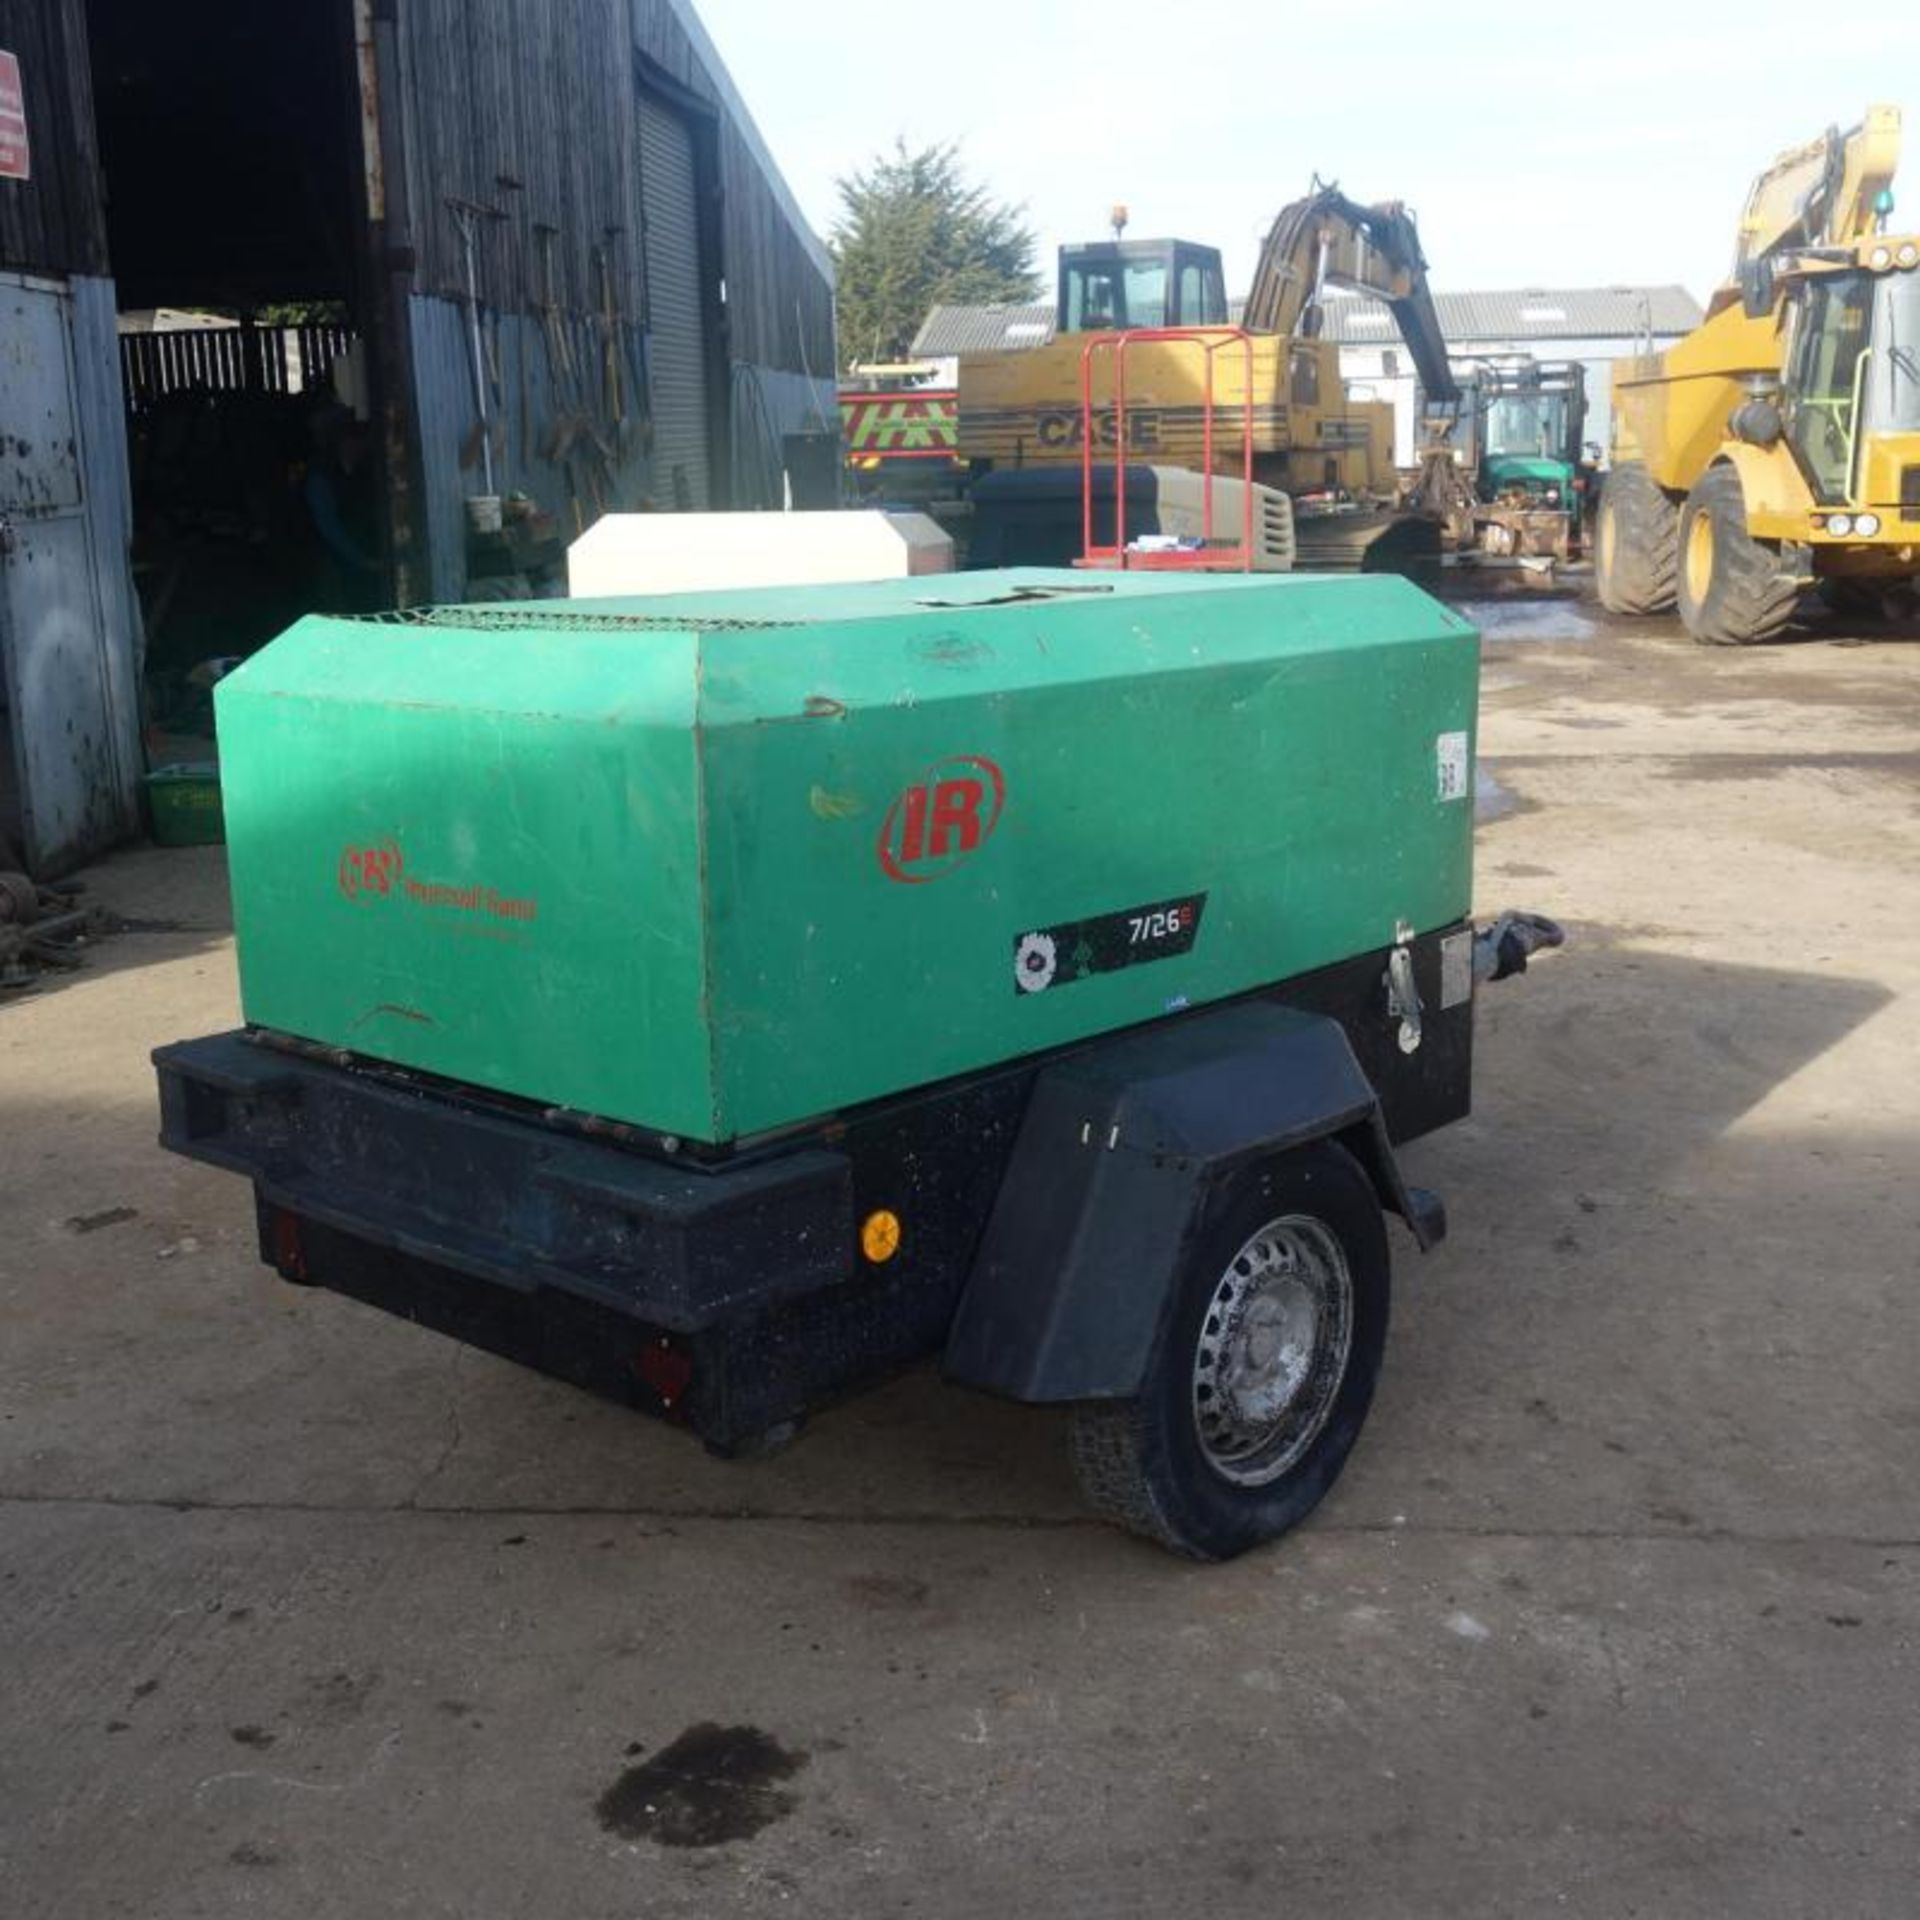 2006 Inersollrand 726e Compressor, Only 3702 Hours From New - Bild 4 aus 5